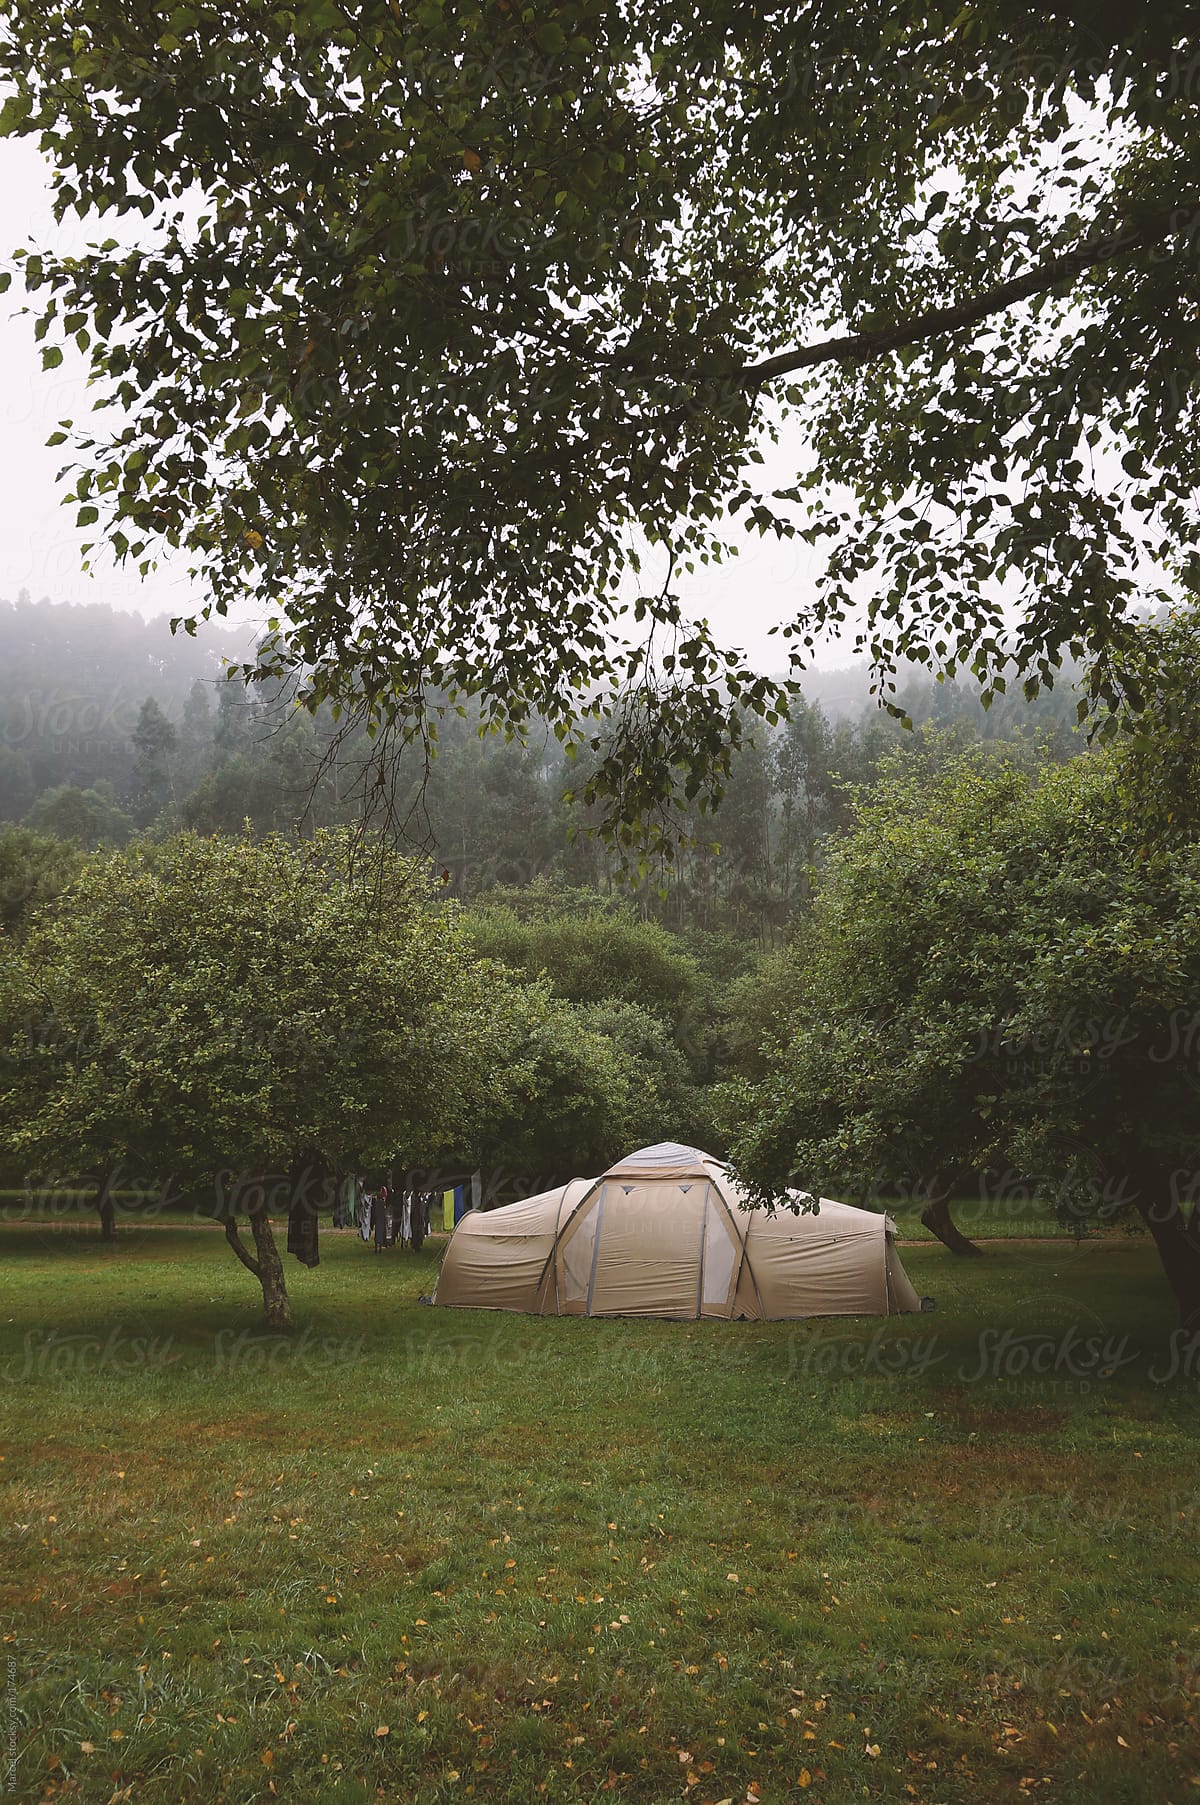 Tent on a campsite